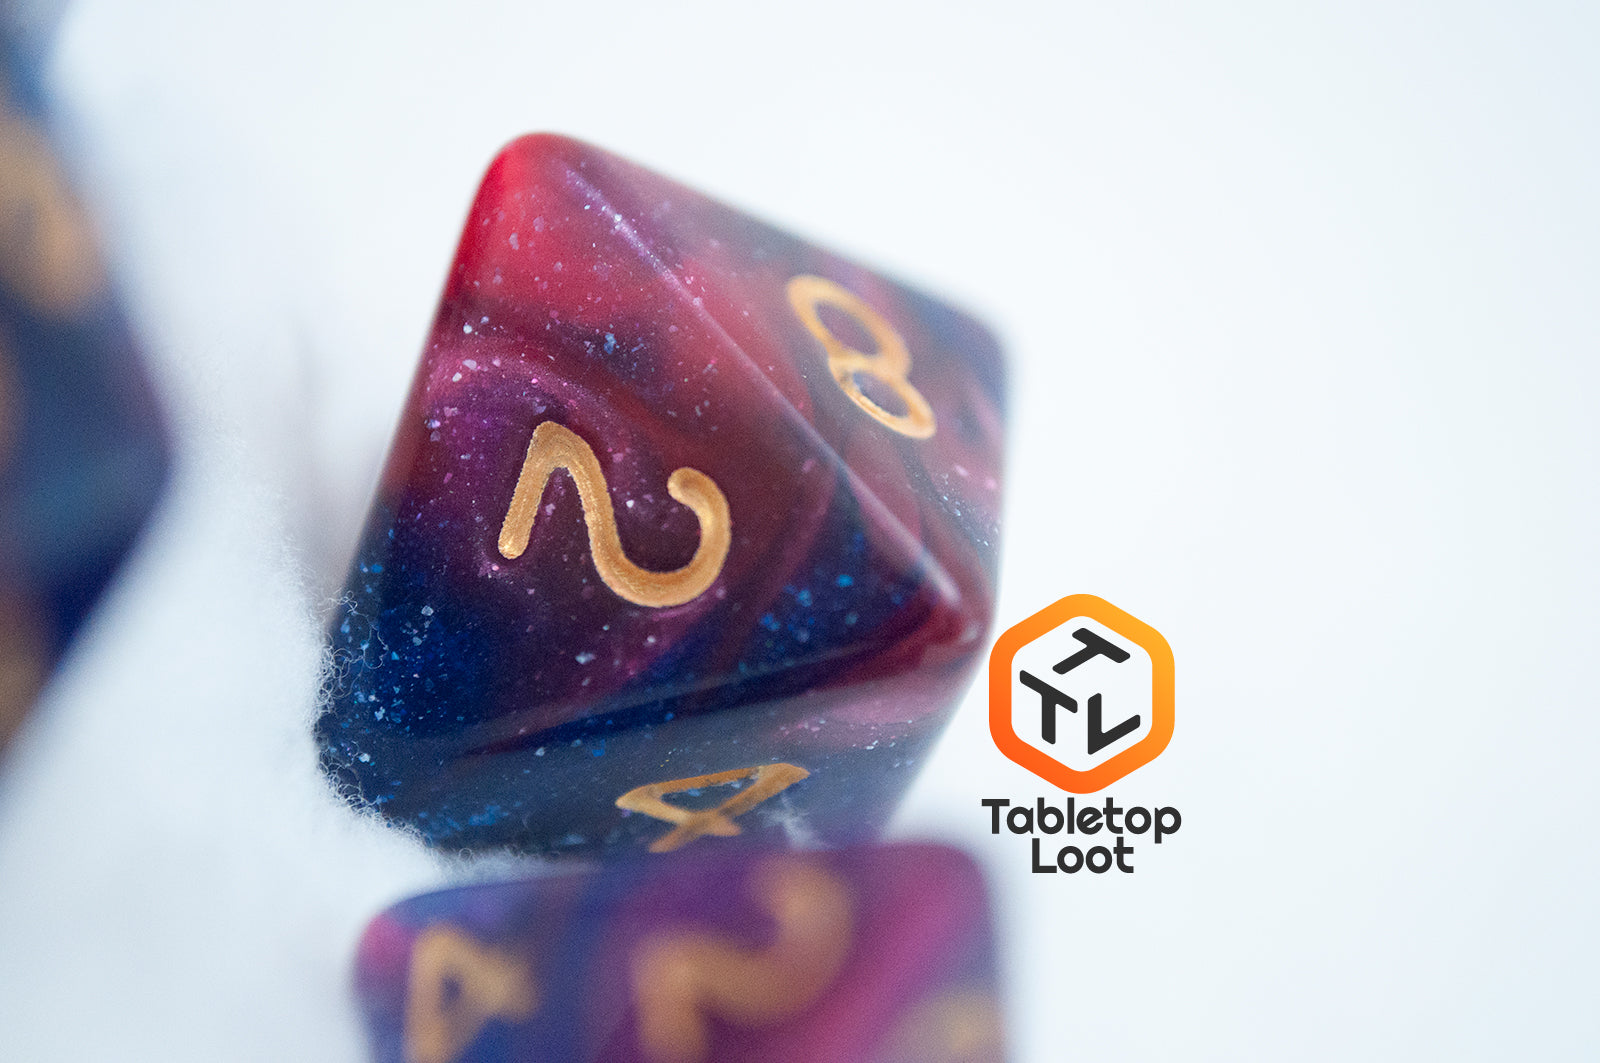 A close up of the D8 from the Rose Galaxy 7 piece dice set from Tabletop Loot with swirls of glittery pink, purple, and blue throughout with gold numbering.